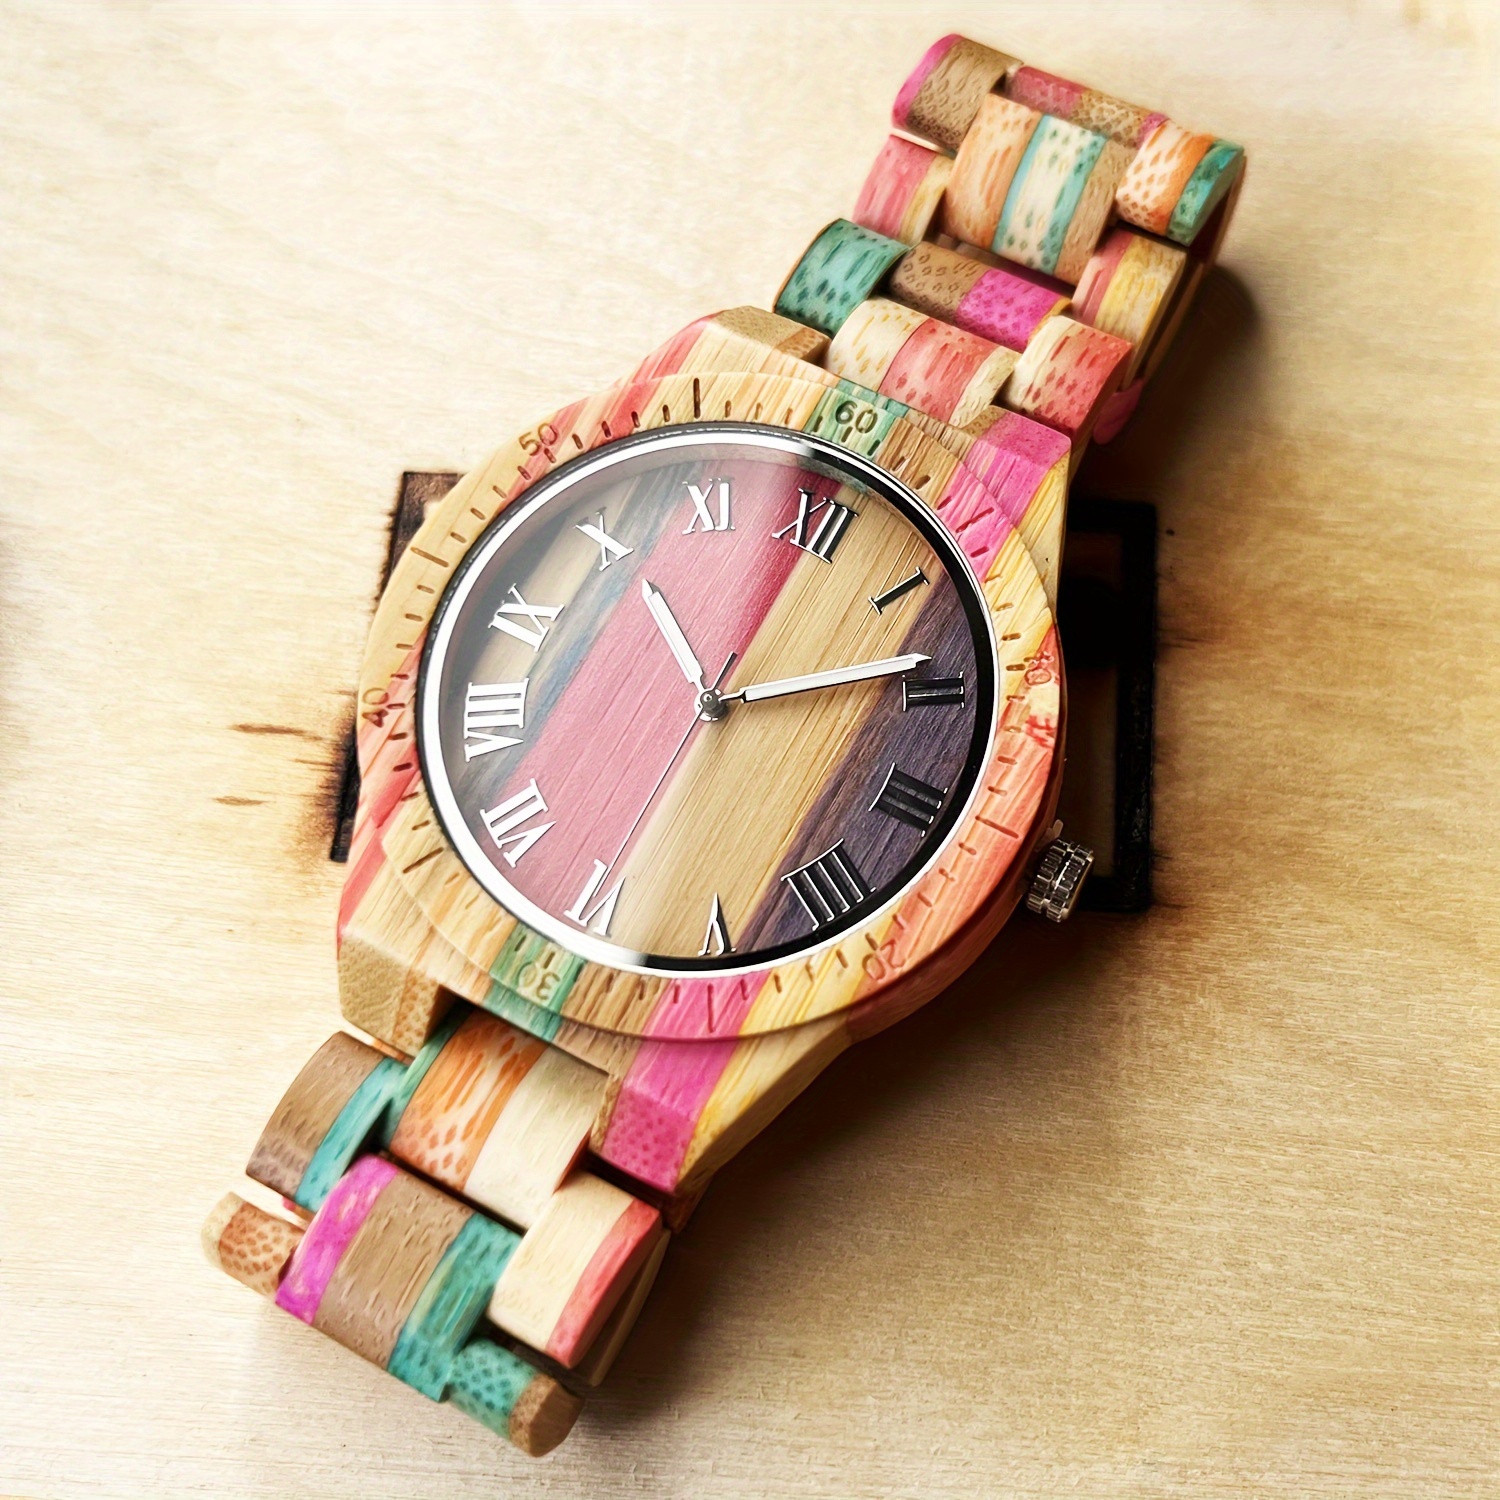 

Casual Wooden Wrist Watch For Men And Women, Quartz Movement, Analog Display, Handcrafted Multicolor Wooden Band And Case, Non-rechargeable Battery - Fashion Accessory